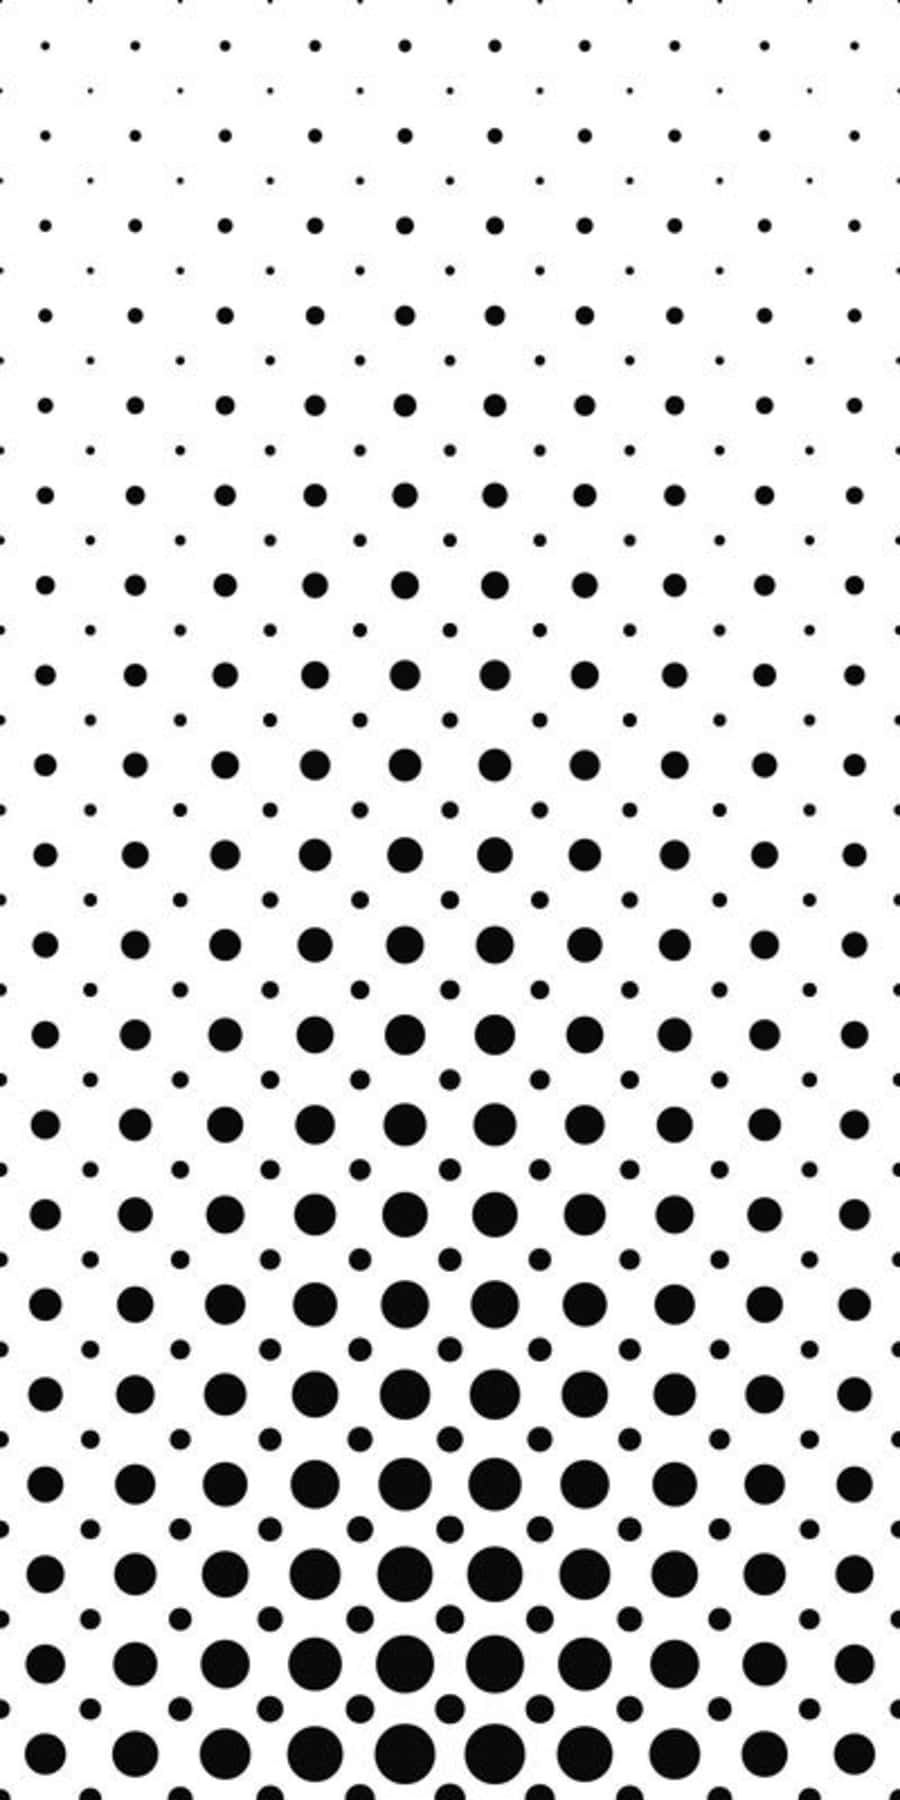 Black and White Dots Abstract Wallpaper Wallpaper